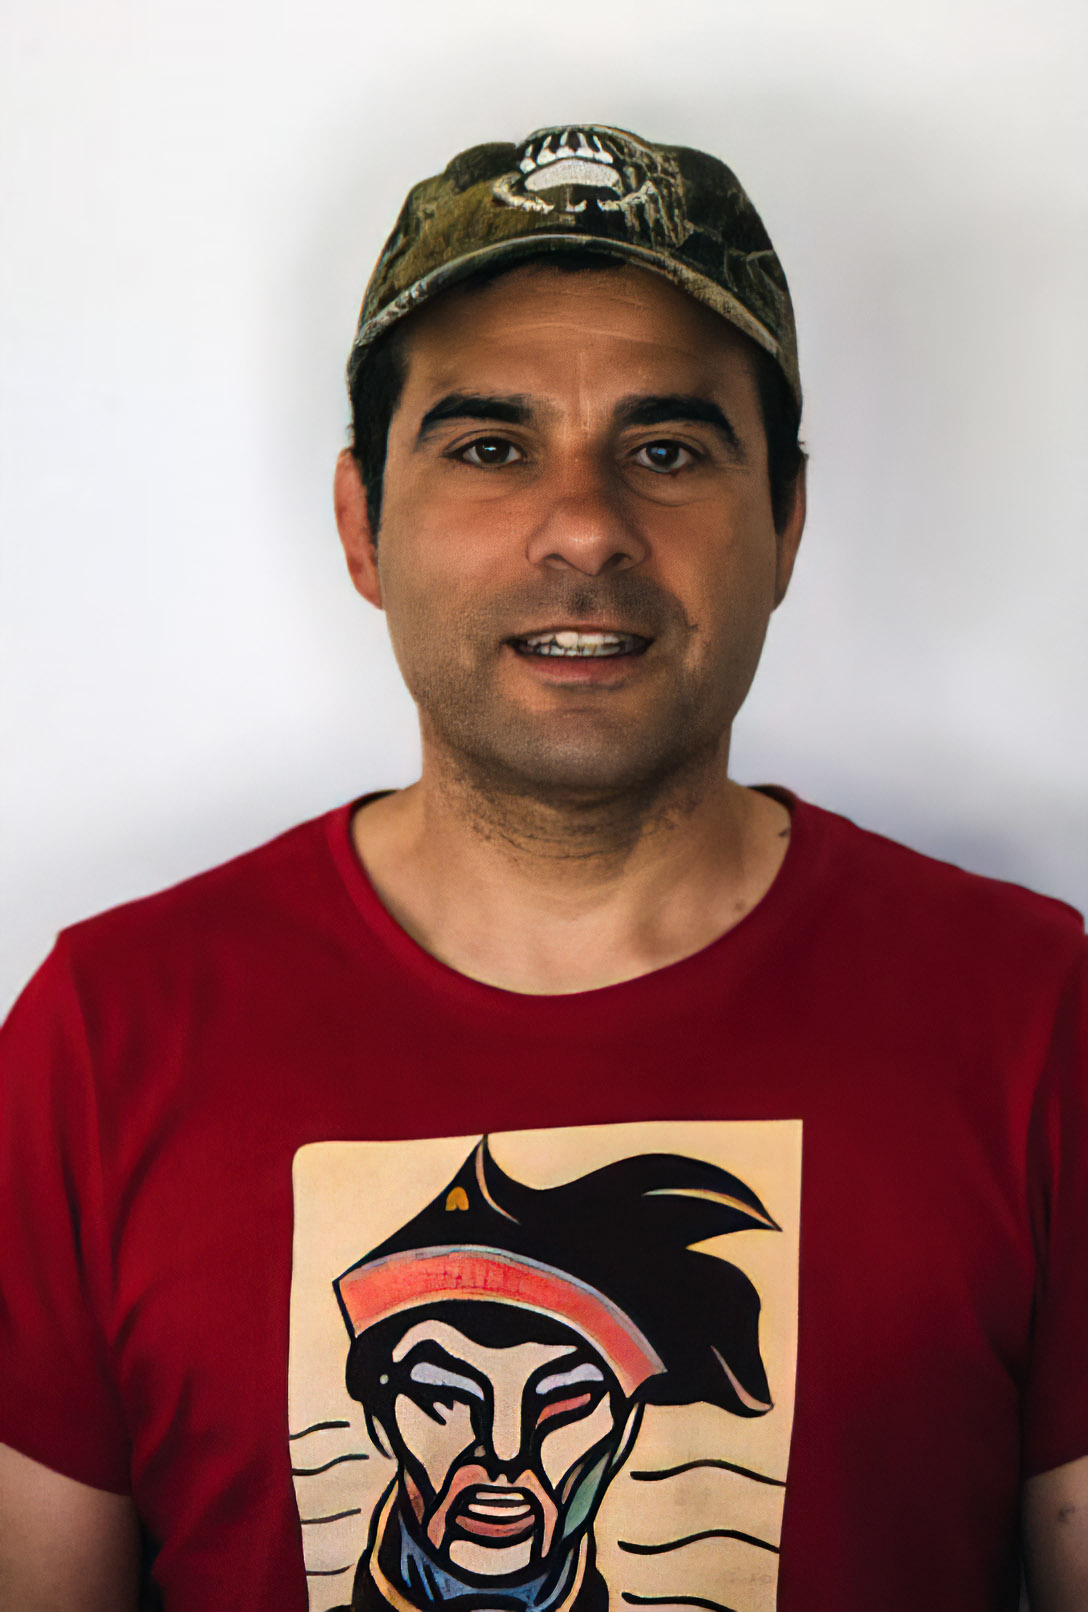 Dr. Robert Serrouya, a man with short hair, standing in front of a white backdrop, wearing a graphic t-shirt and a camo baseball cap.